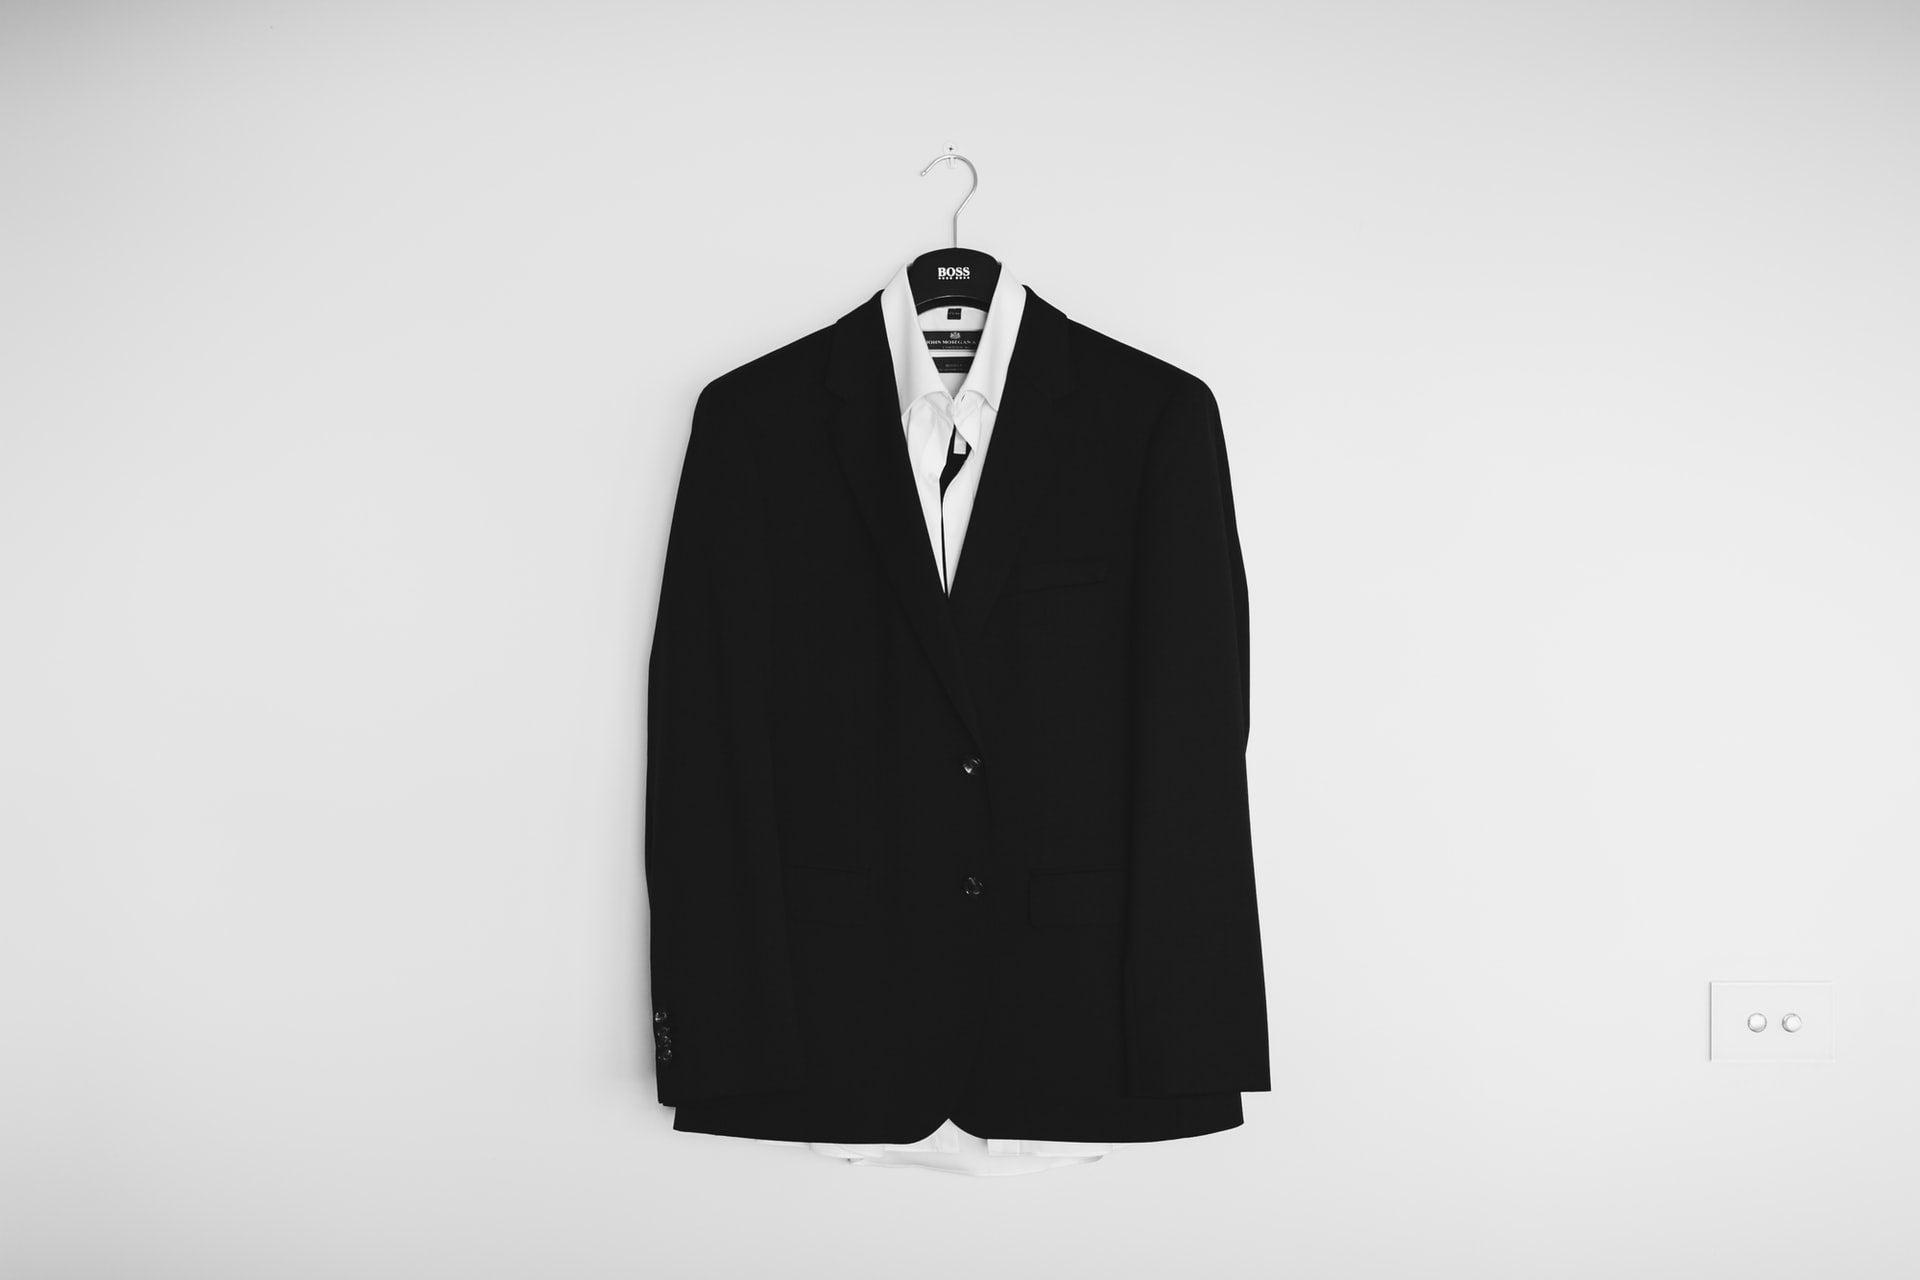 Ways to Style a Tuxedo for Virtual Events